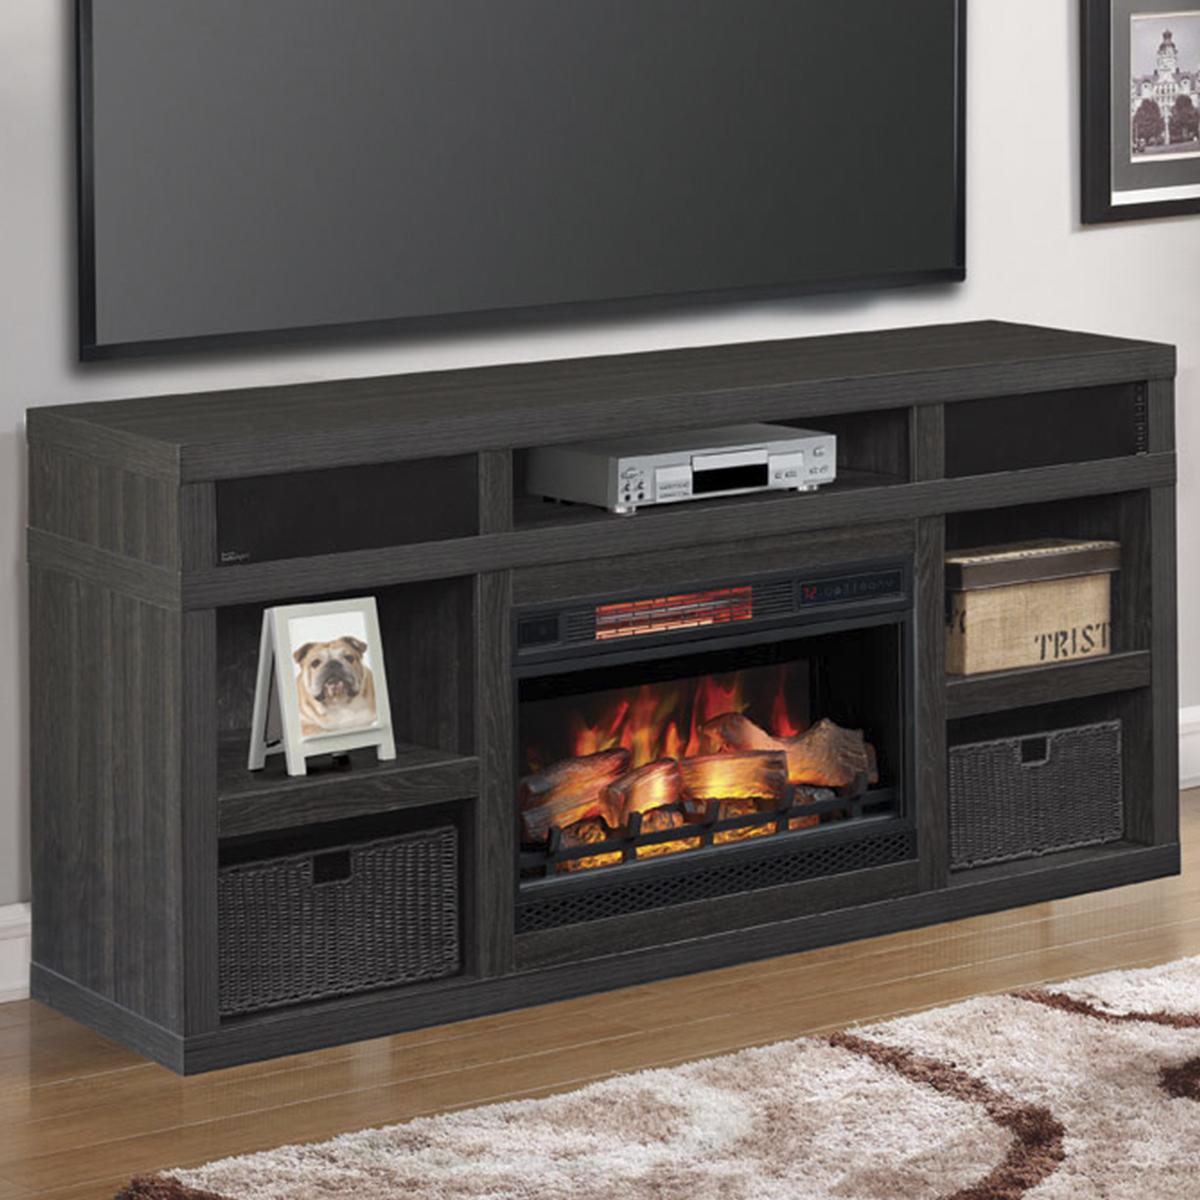 70 Tv Stand with Fireplace Inspirational Fabio Flames Greatlin 64" Tv Stand In Black Walnut